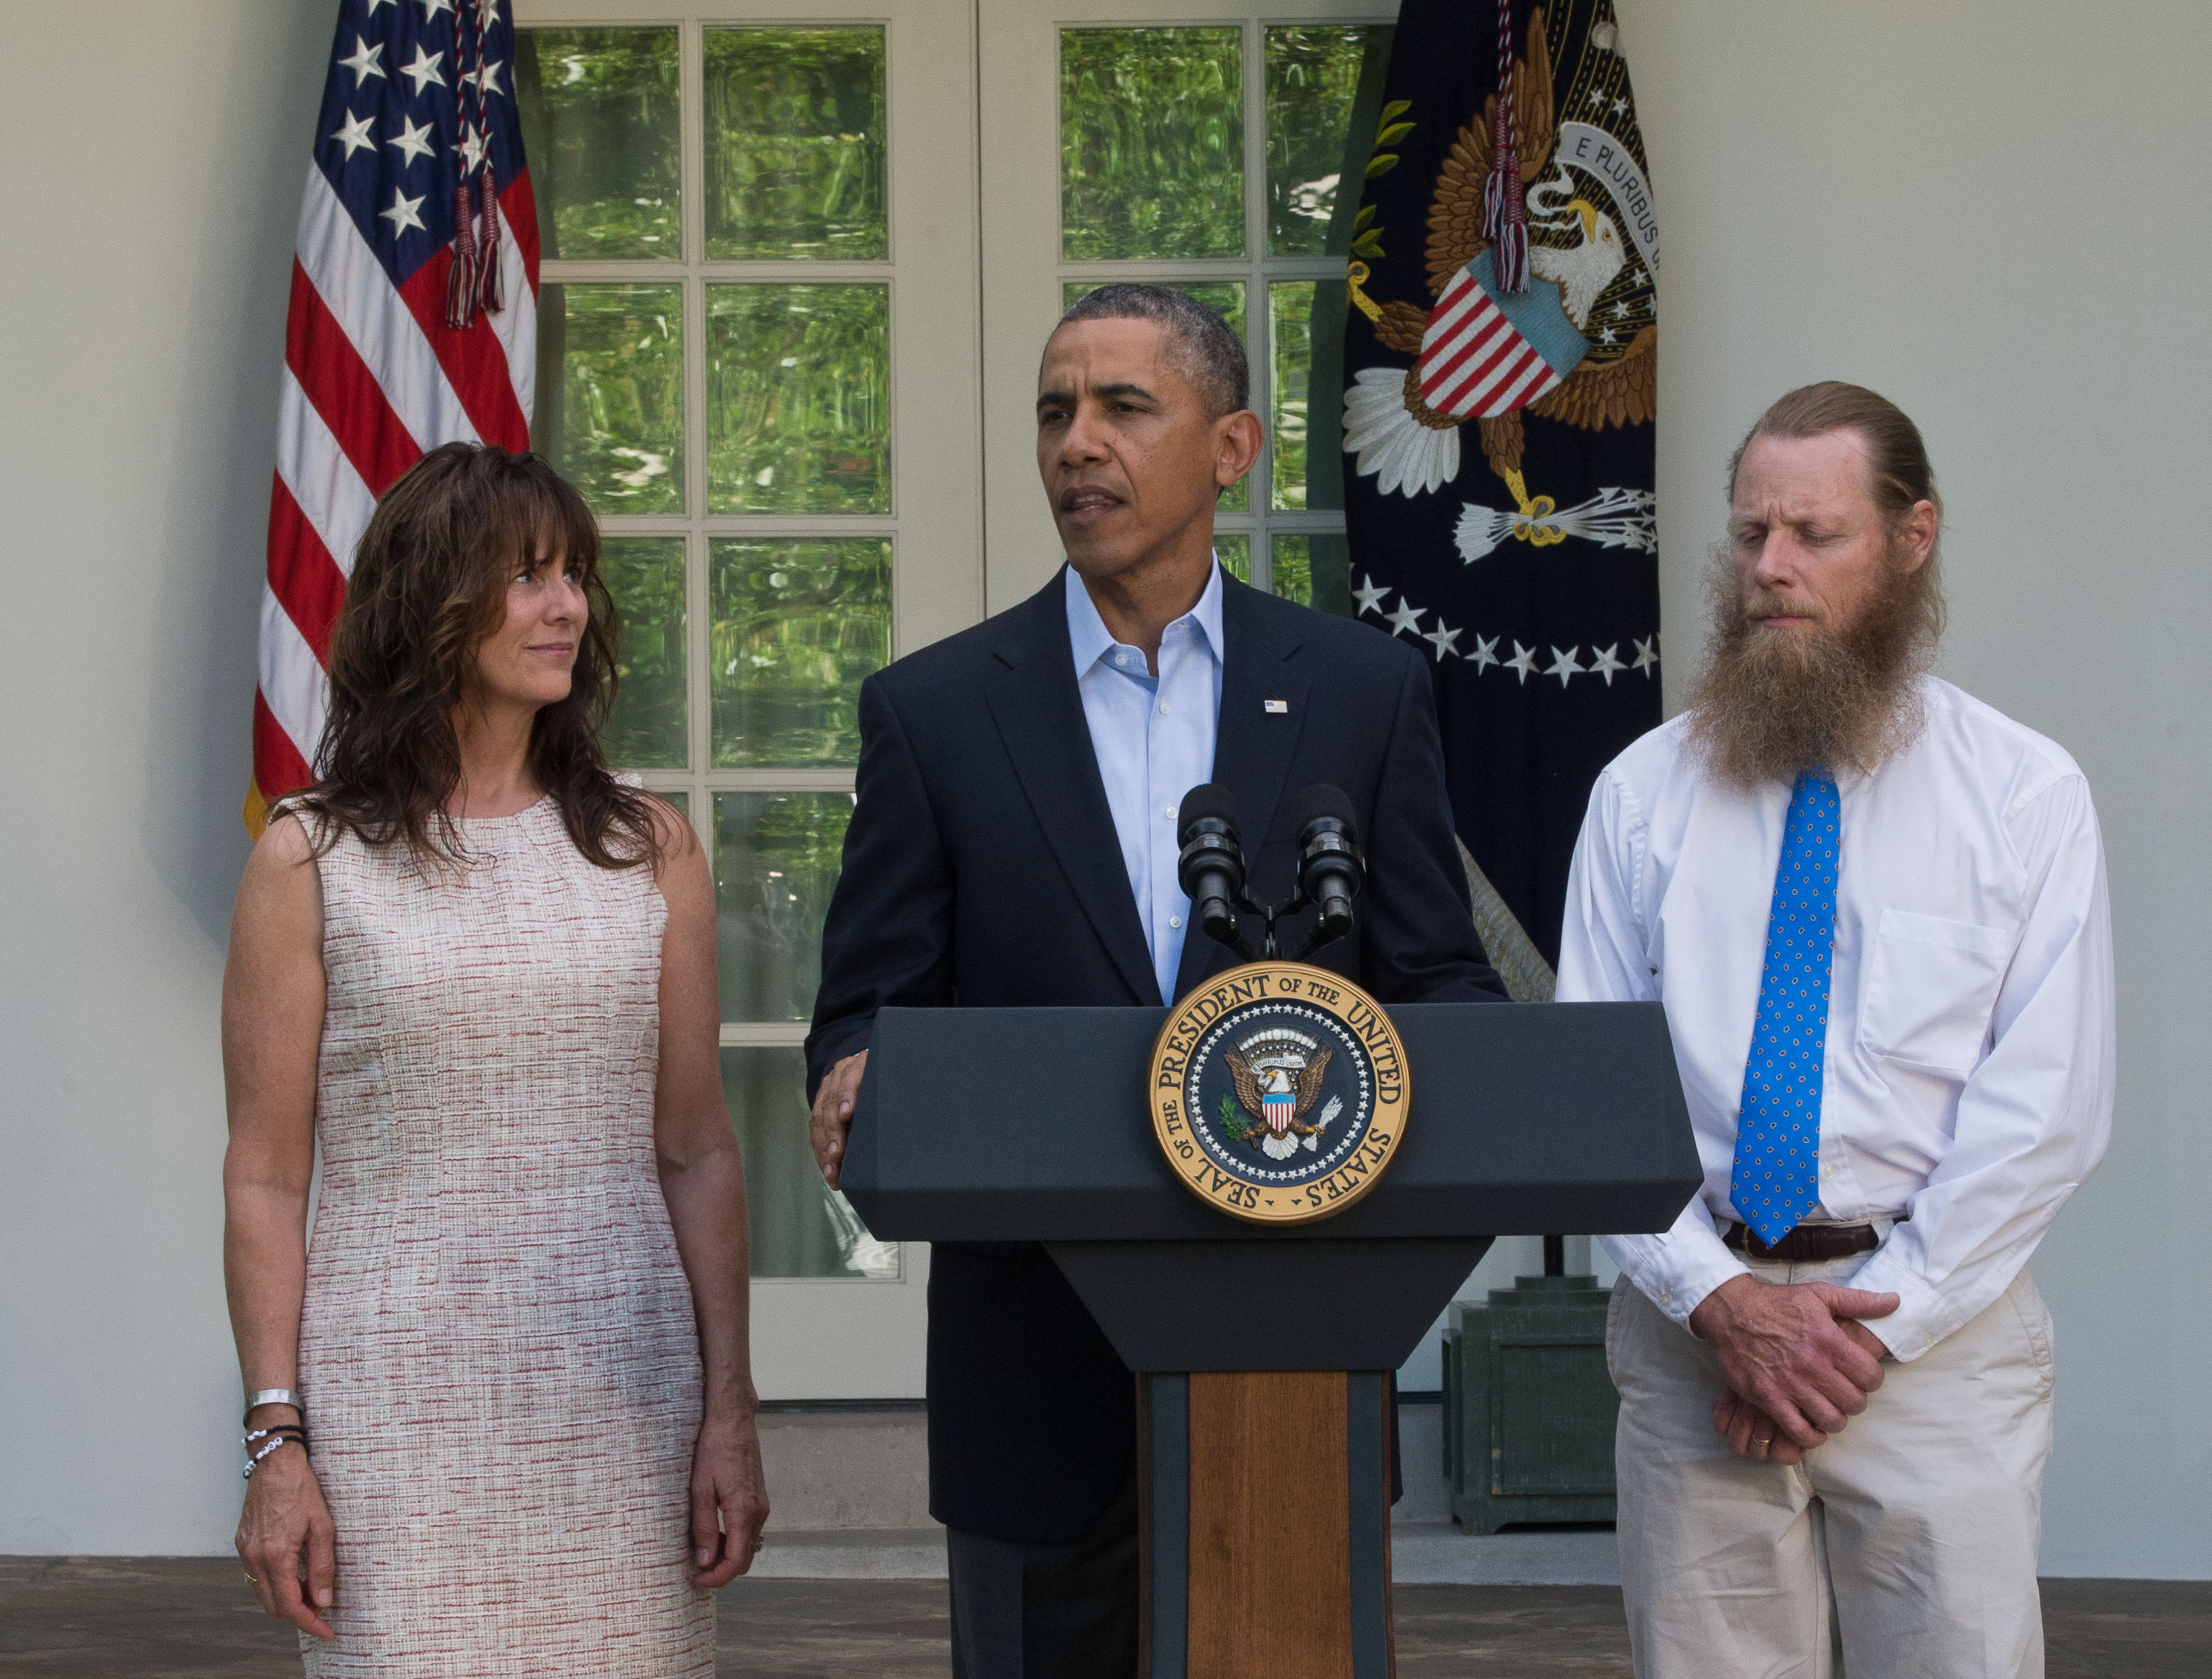 President Barack Obama makes a statement about the release of Sgt. Bowe Bergdahl as his parents, Jani Bergdahl (L) and Bob Bergdahl (R) listen May 31, 2014 in the Rose Garden at the White House in Washington, DC. Sgt. Bowe Bergdahl was held captive by militants for almost five years during the war in Afghanistan. (Getty)